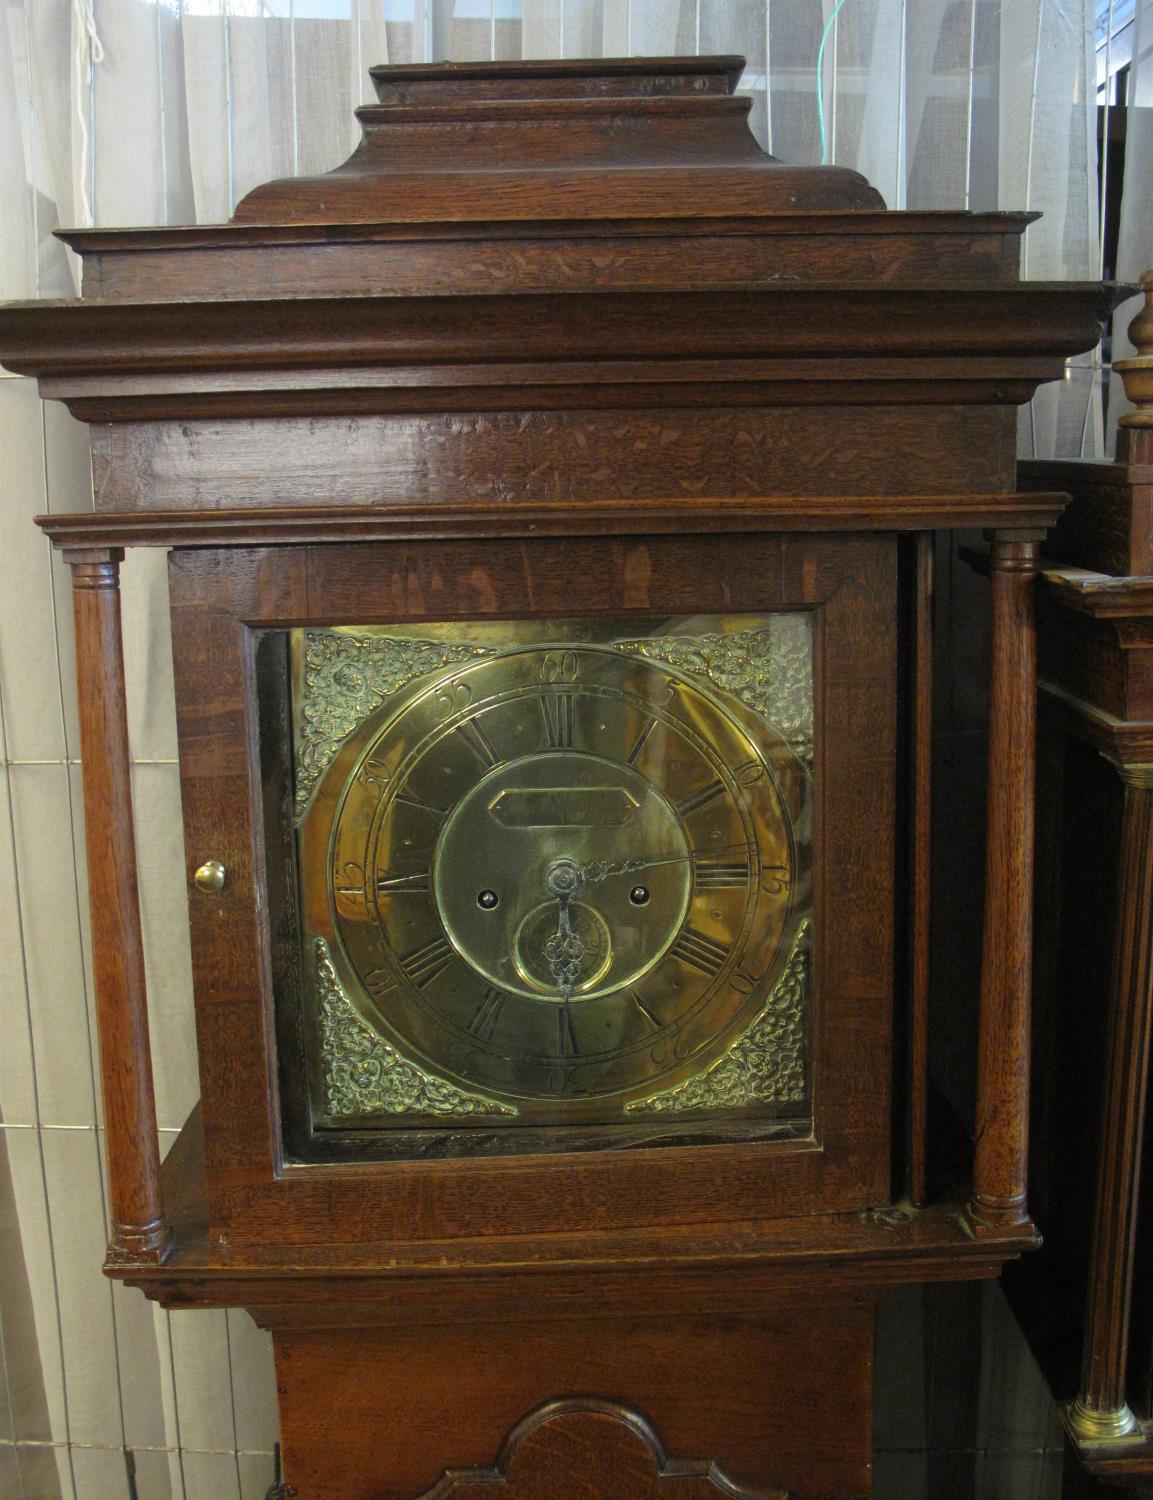 18TH CENTURY OAK 8 DAY LONGCASE CLOCK marked 'John Whitfield, Clifton', the hood with caddy top